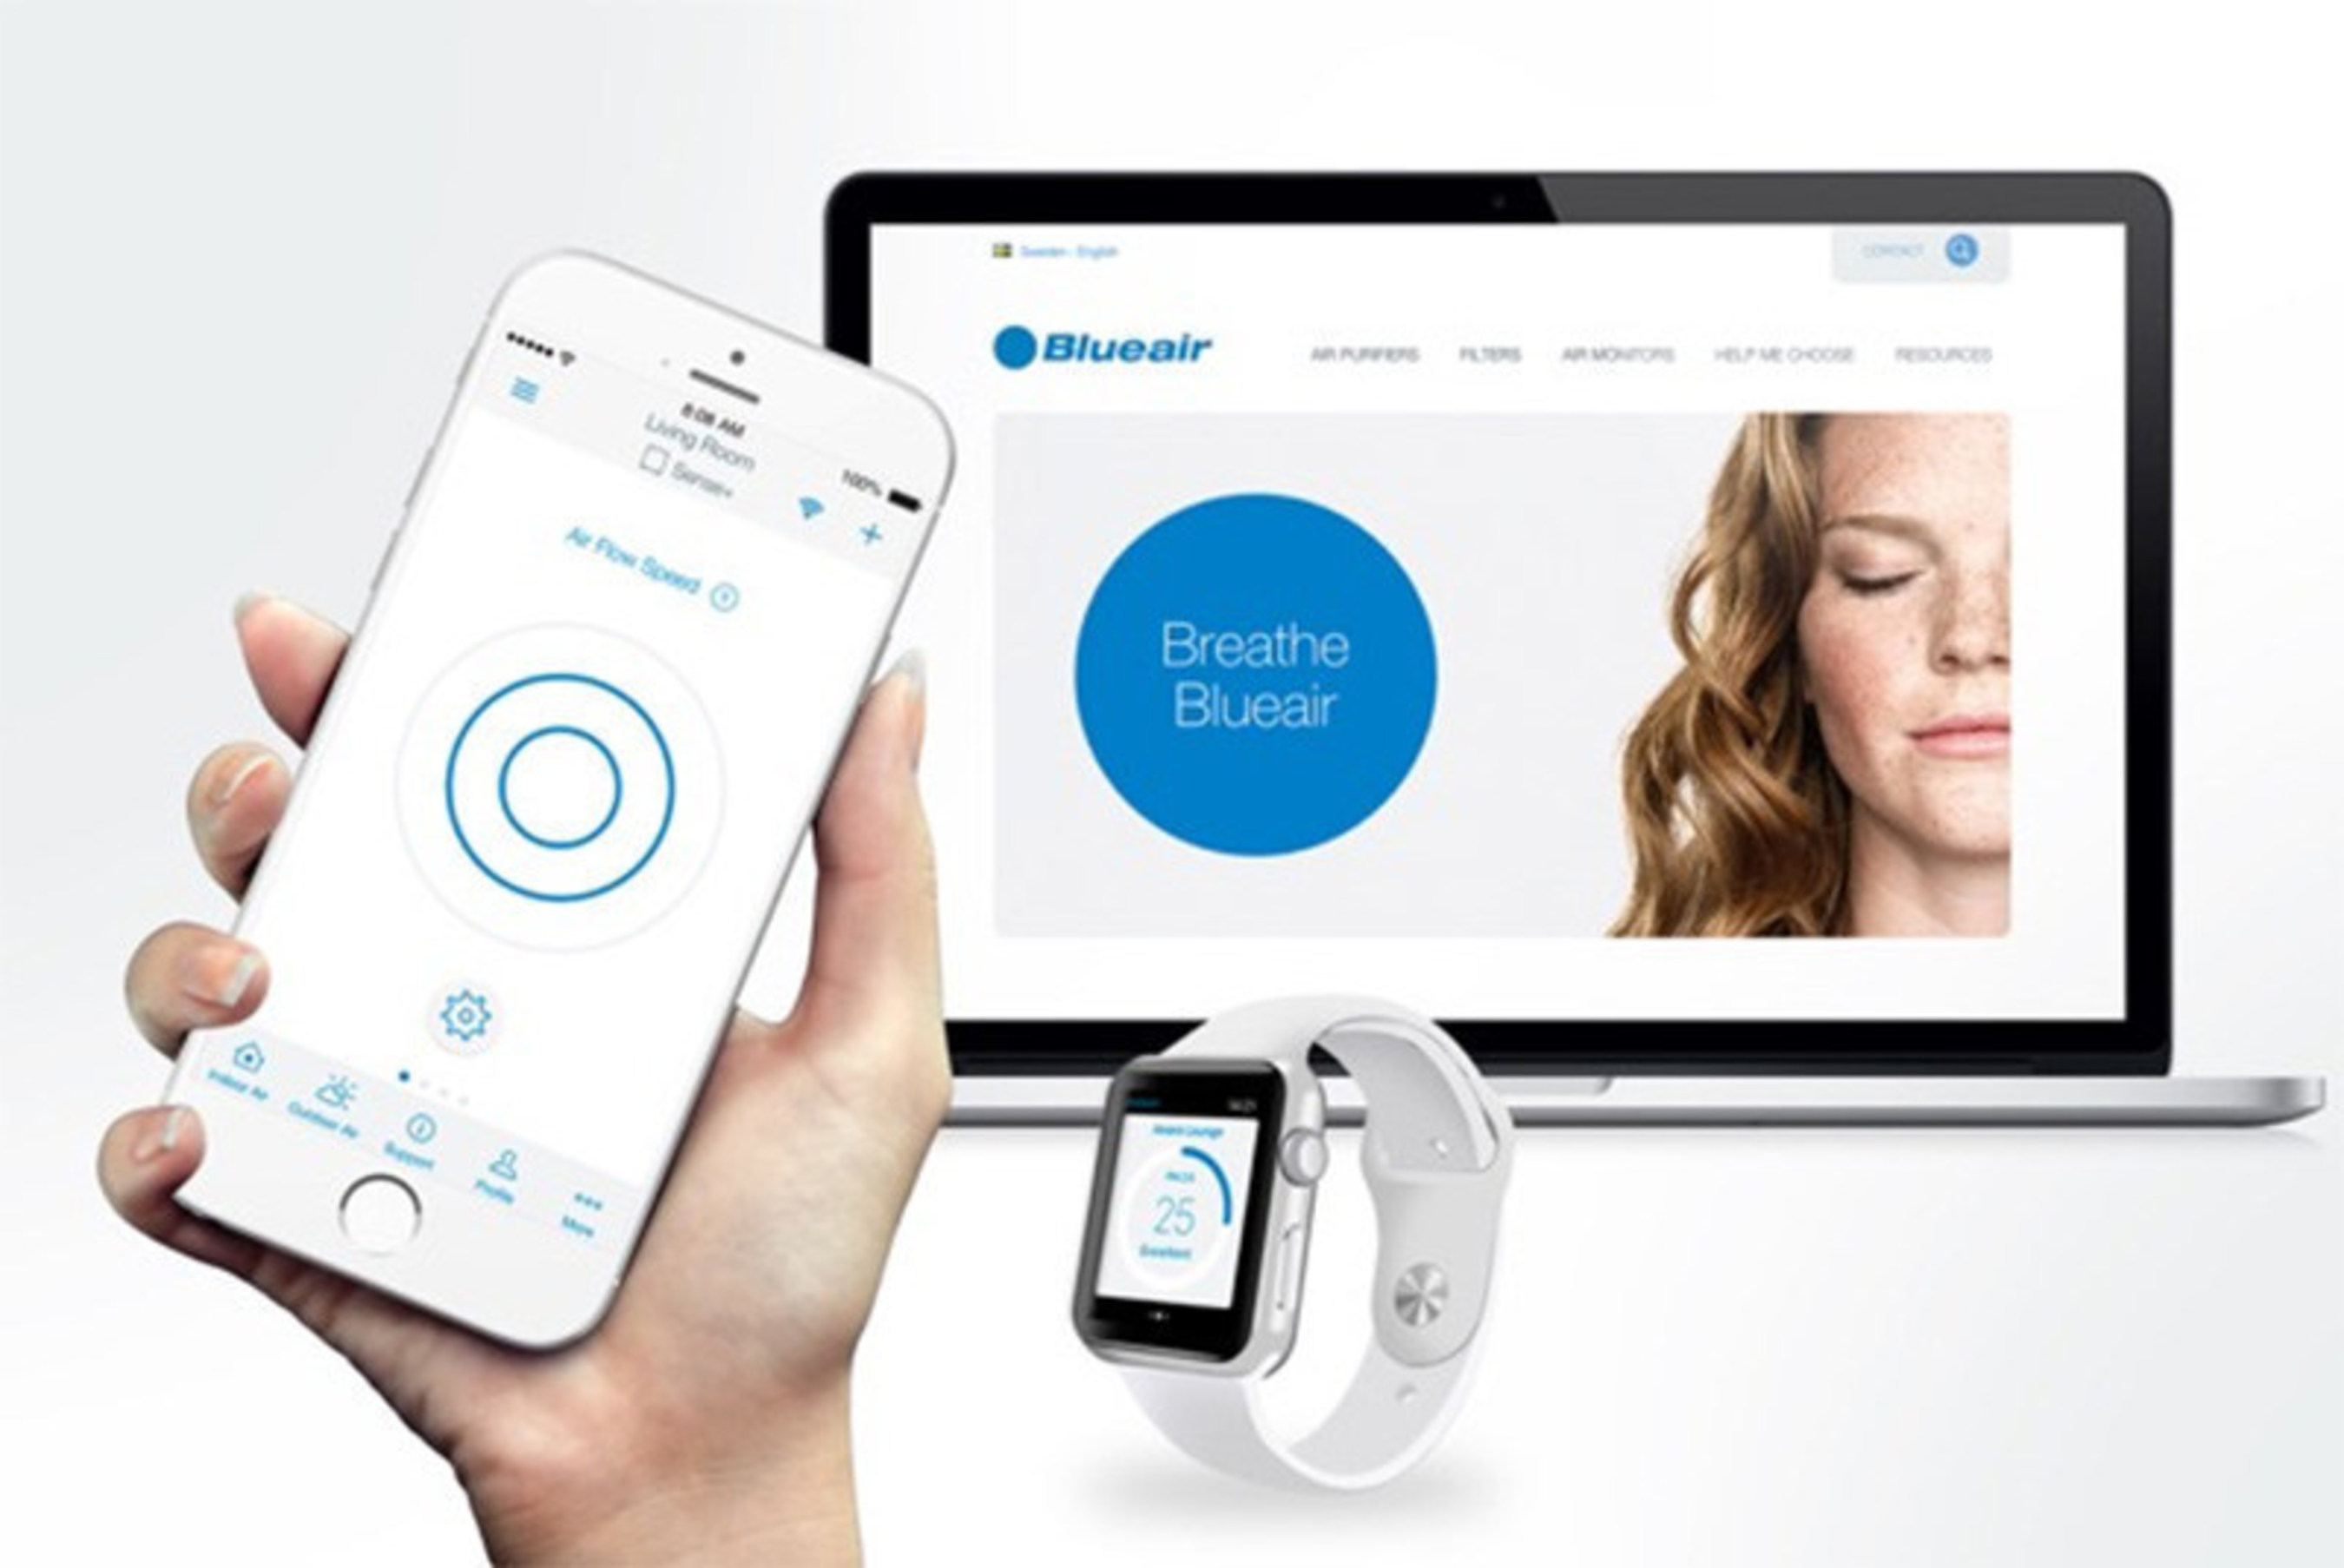 Blueair's Cloud-based Wi-Fi connected air quality monitoring devices, including the Aware AQ monitor and Blueair Friend app that can be installed on all Android and Apple mobile devices including the Apple watch, connect wirelessly to a Blueair indoor air purifier to adjust its performance in line with indoor air pollution levels. (PRNewsFoto/Blueair) (PRNewsFoto/Blueair)